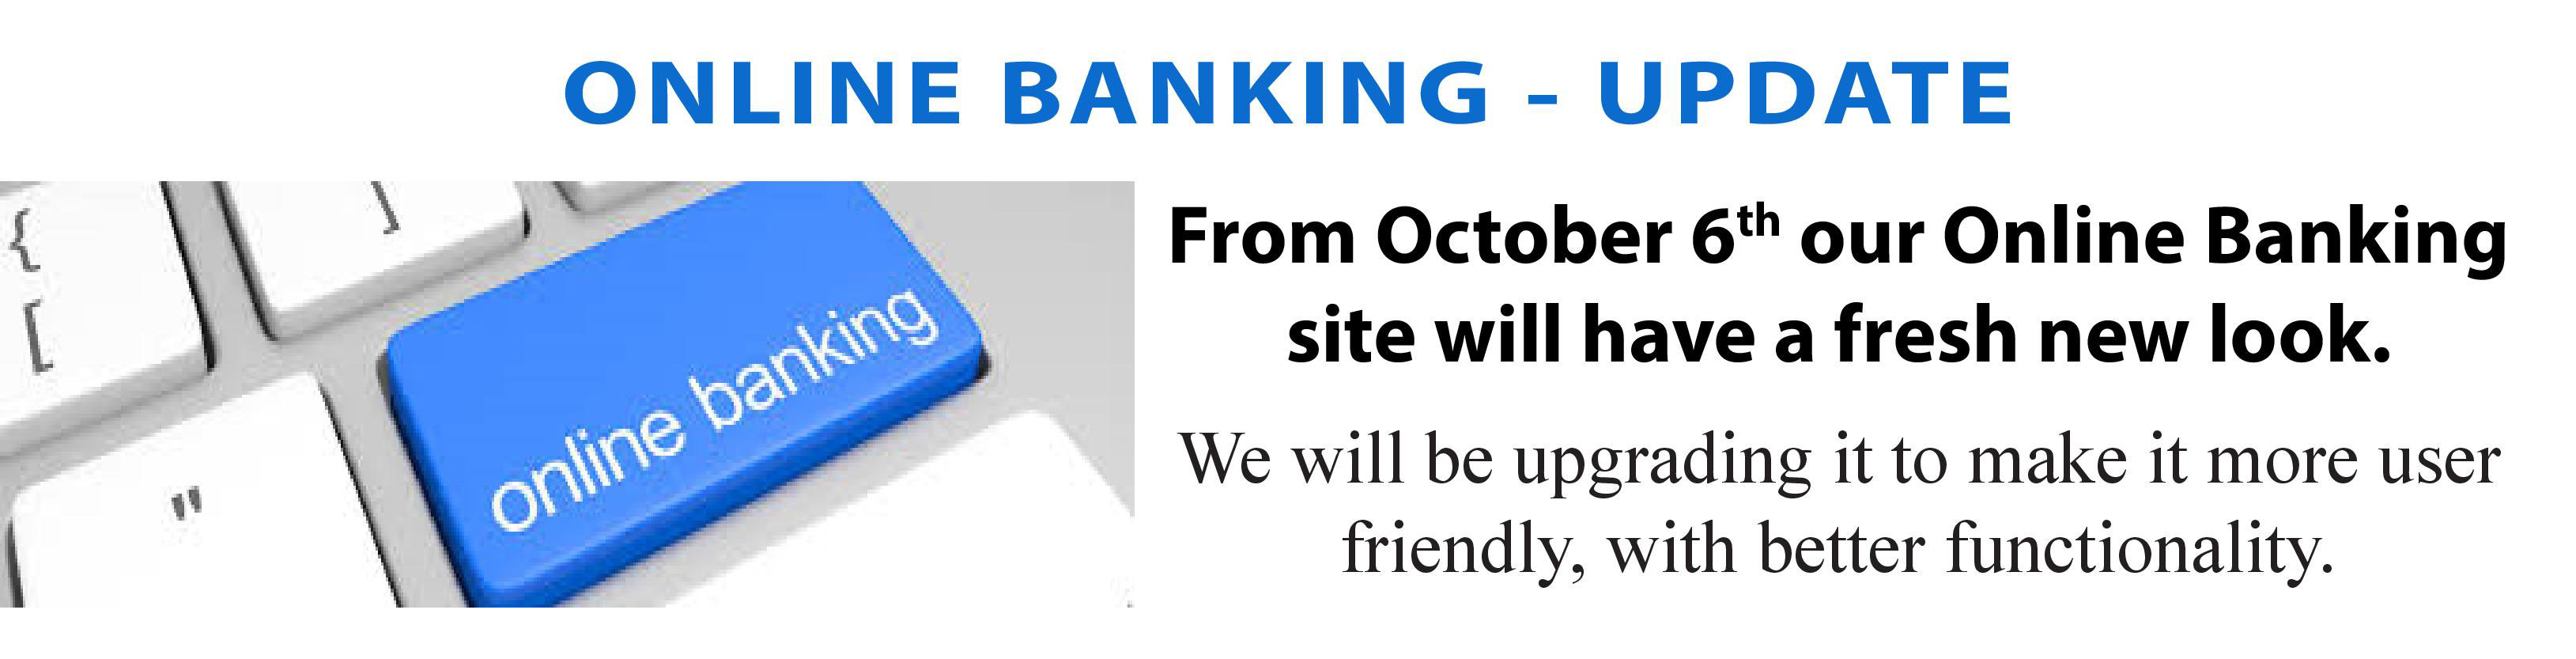 On October 6th, our online banking site will have a new look